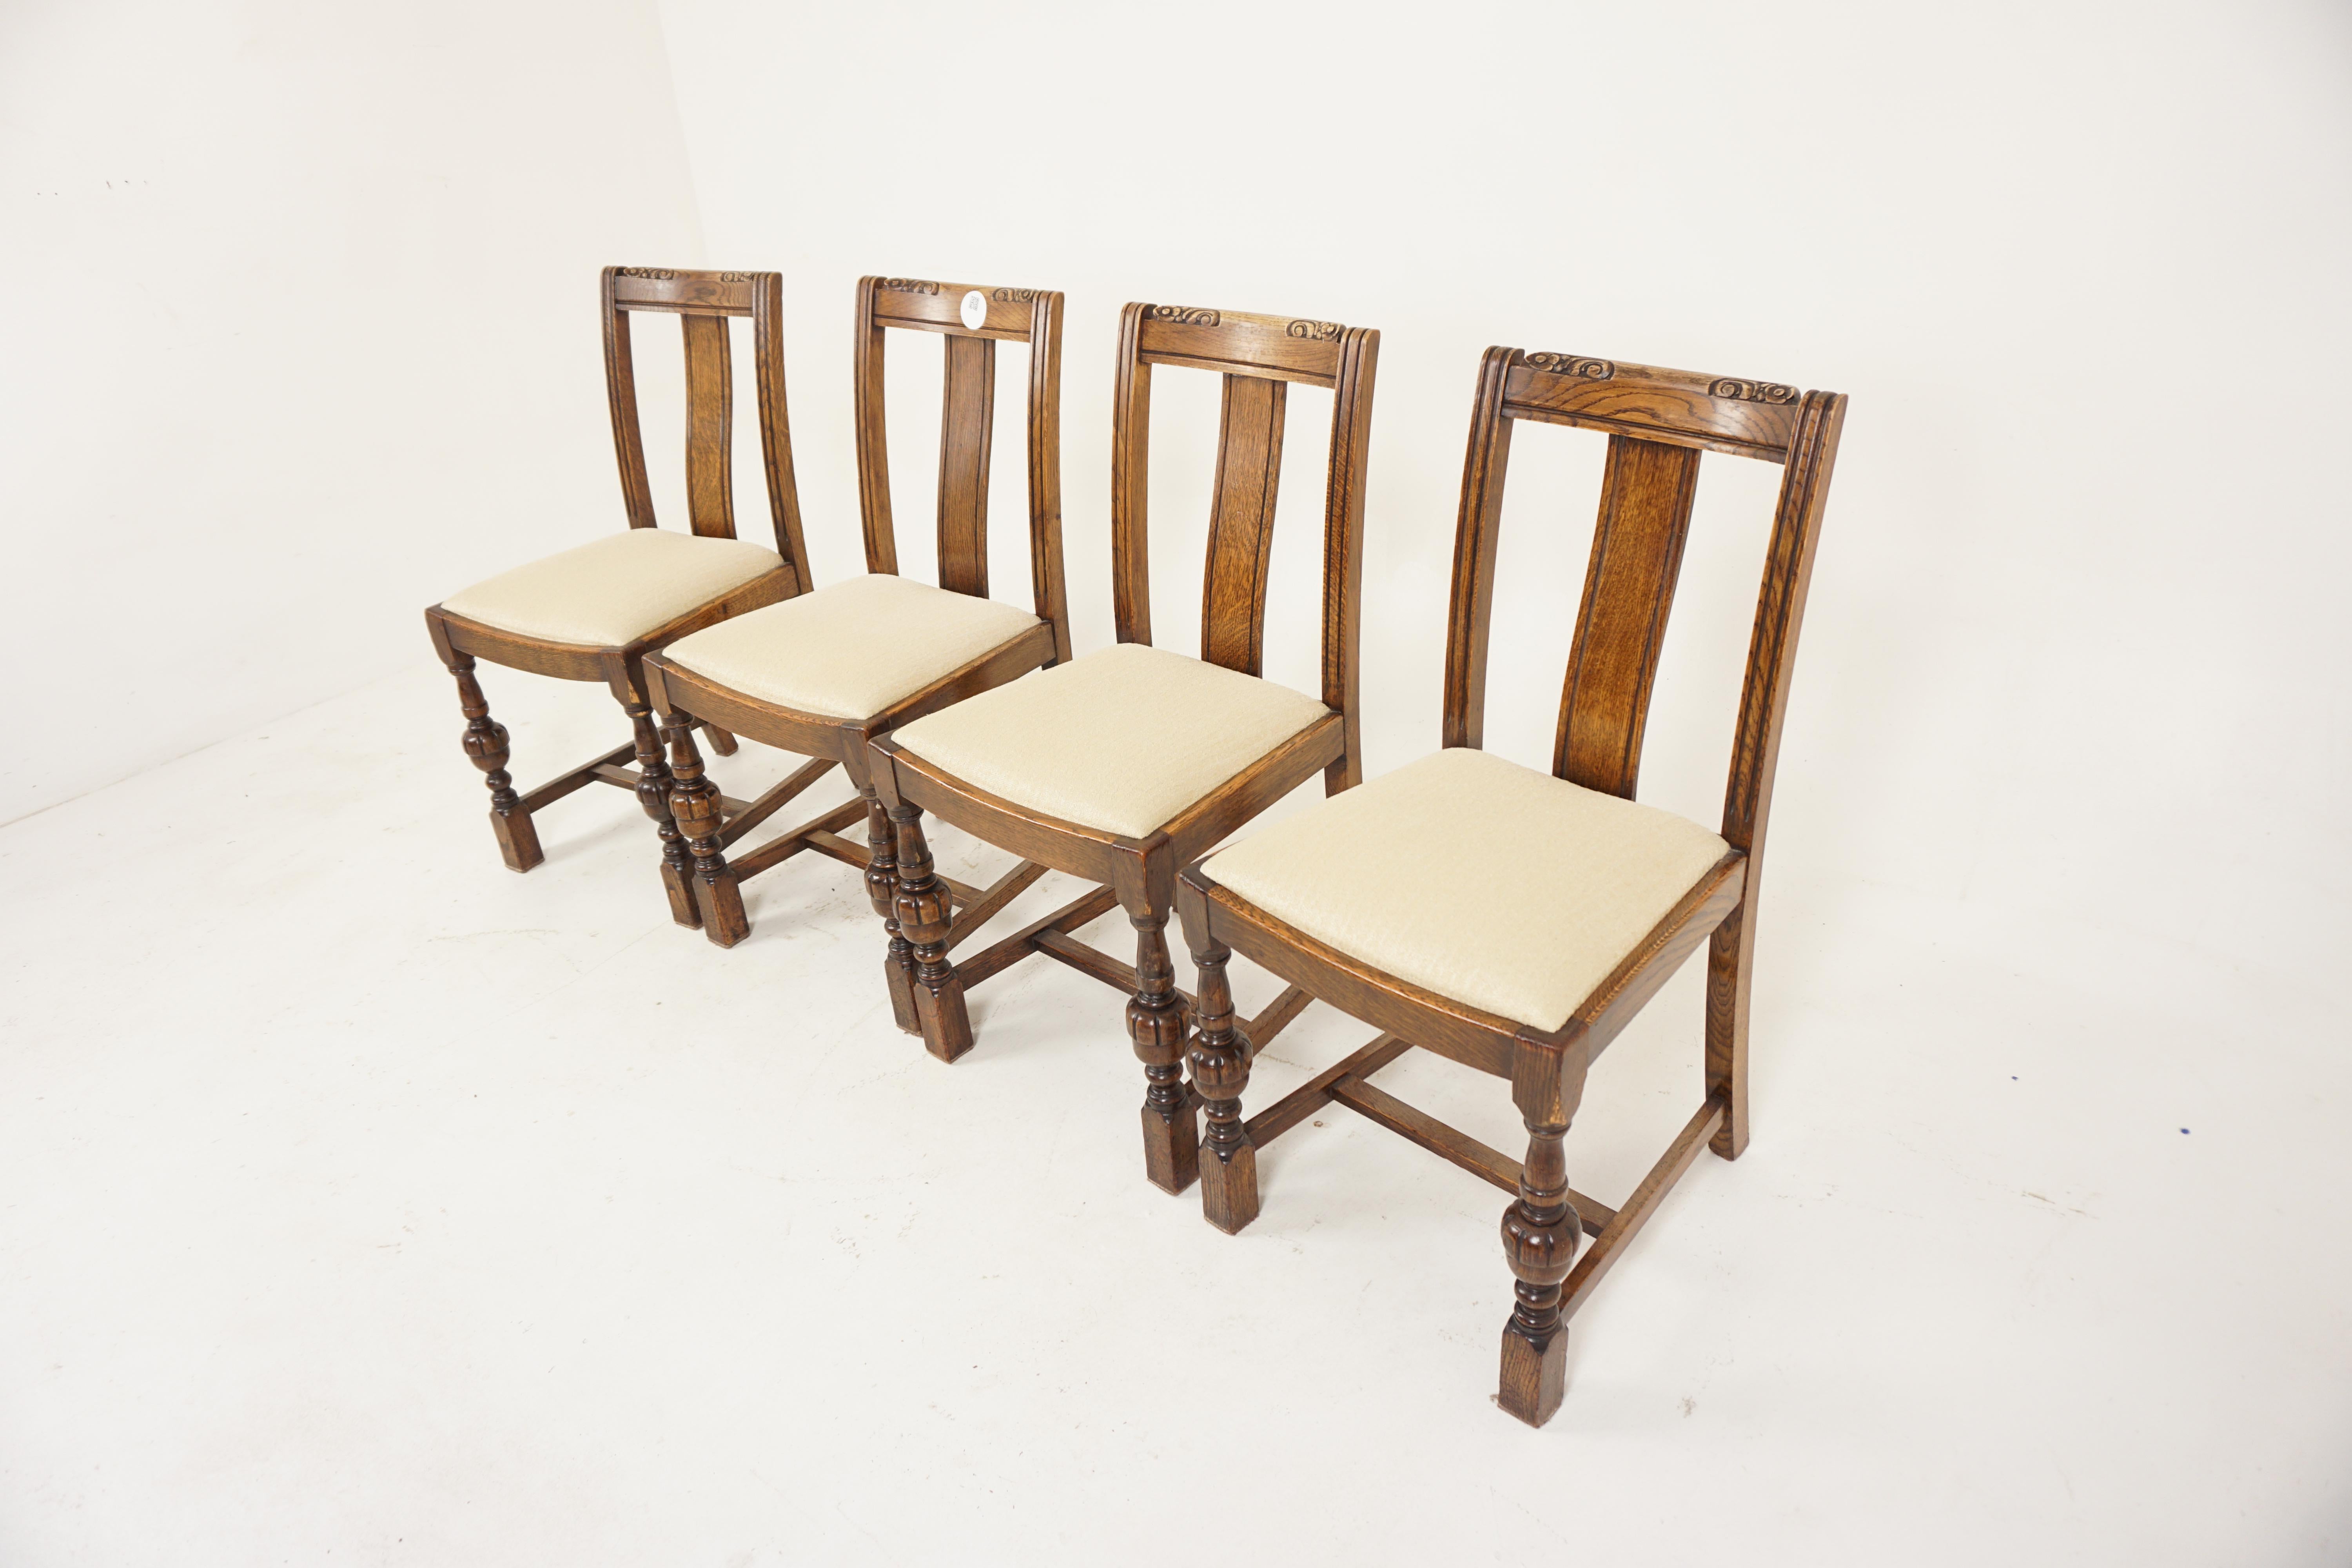 4 Art Deco Carved Dining Chairs, Lift Out Seats, Scotland 1930, H692

Scotland 1930
Solid Oak
Original Finish
Carved Top rail
Single shaped slat underneath
Large lift out upholstered seat
All standing on turned bulbous front legs connected by an 